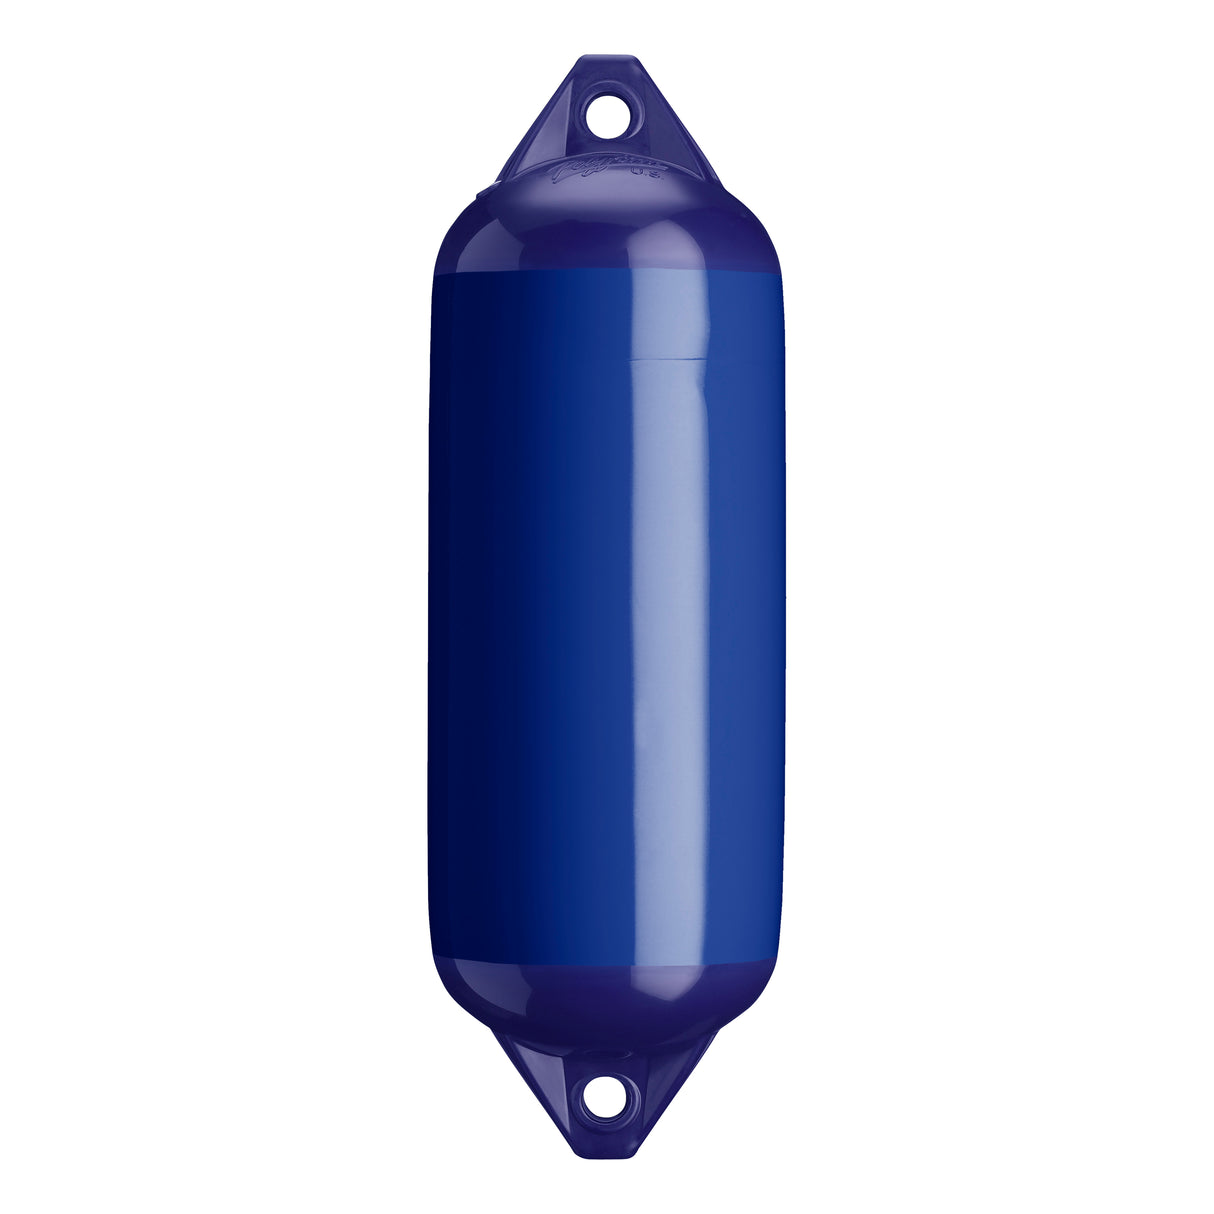 Cobalt Blue boat fender with Navy-Top, Polyform F-2 